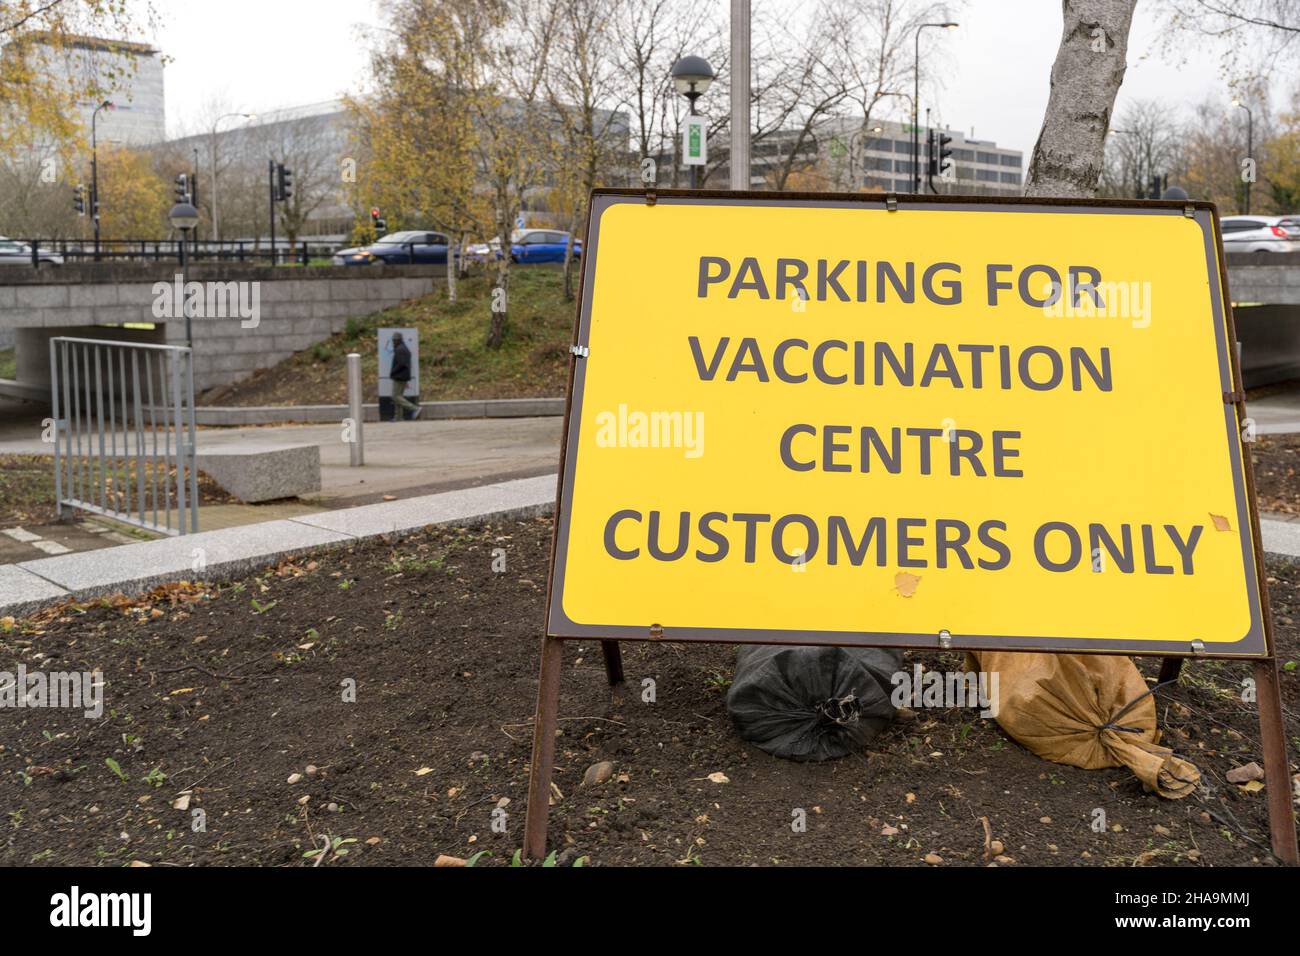 Milton Keynes, UK. 11th Dec, 2021. COVID-19 vaccination Centre welcome general public to take Coronavirus vaccine to combat the latest Omicron variant among the other variants in the Borough of Milton Keynes in Buckinghamshire England. Credit: xiu bao/Alamy Live News Stock Photo